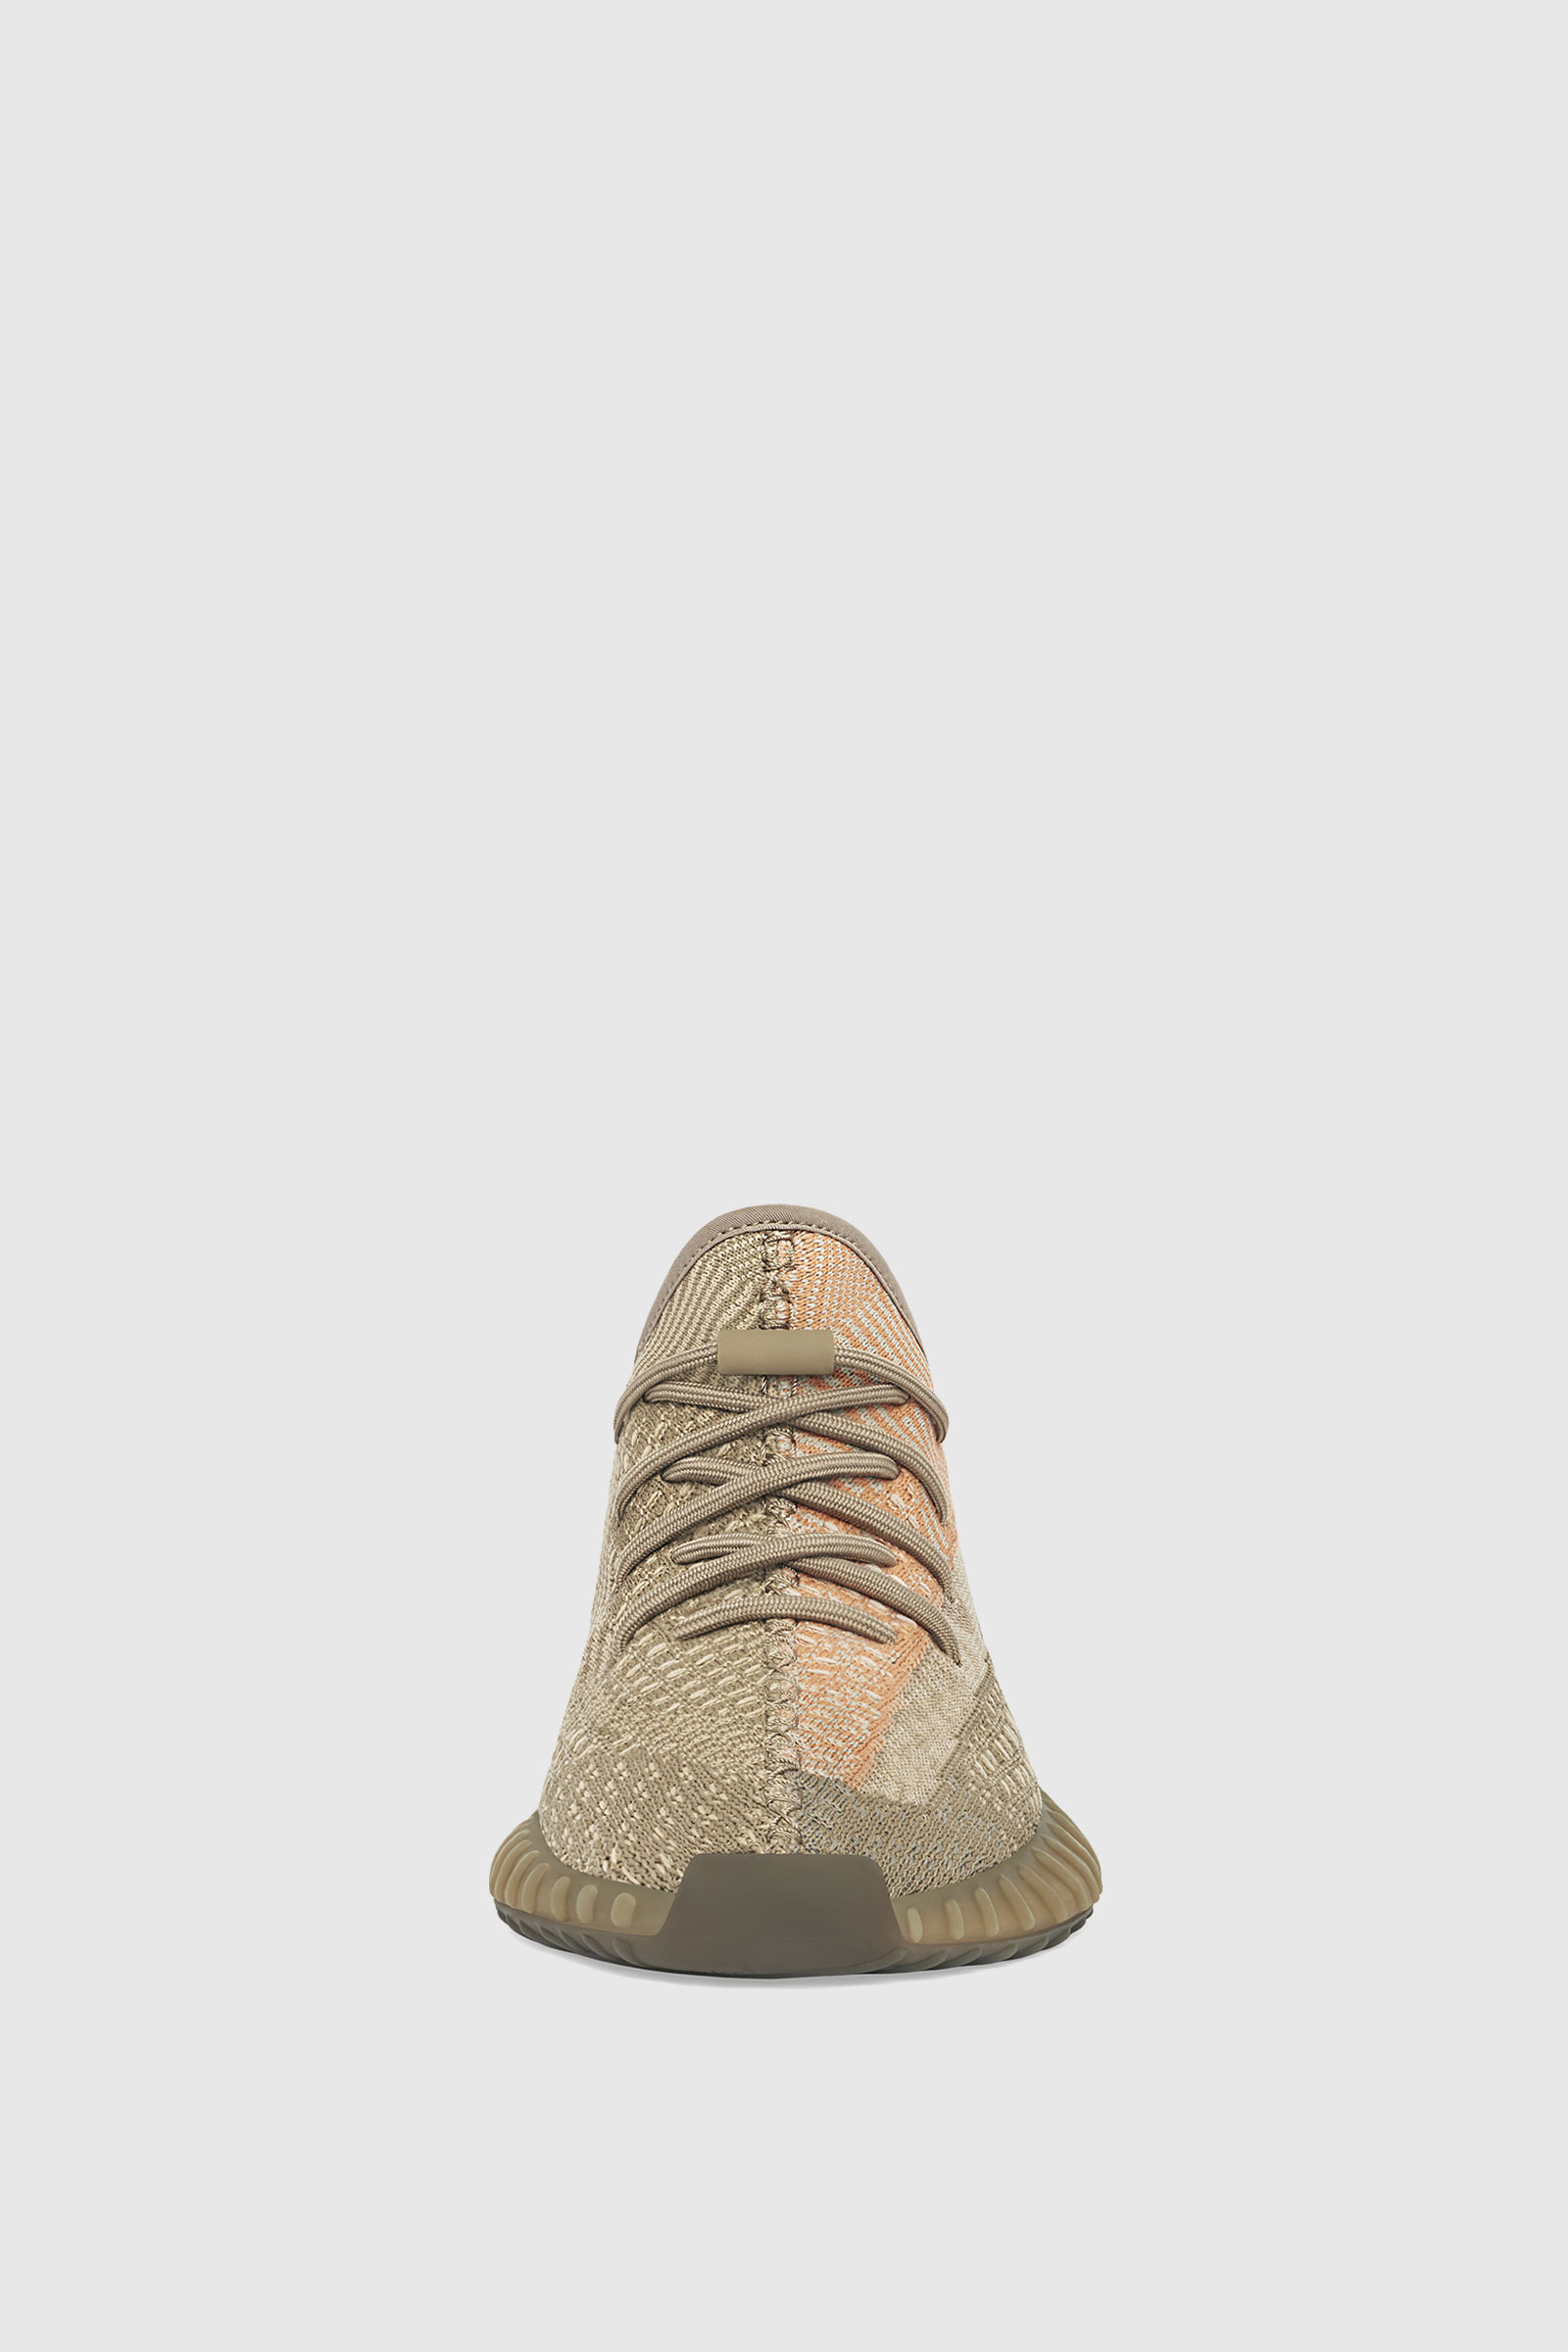 Wood Wood - Yeezy Boost 350 v2 'Sand Taupe'